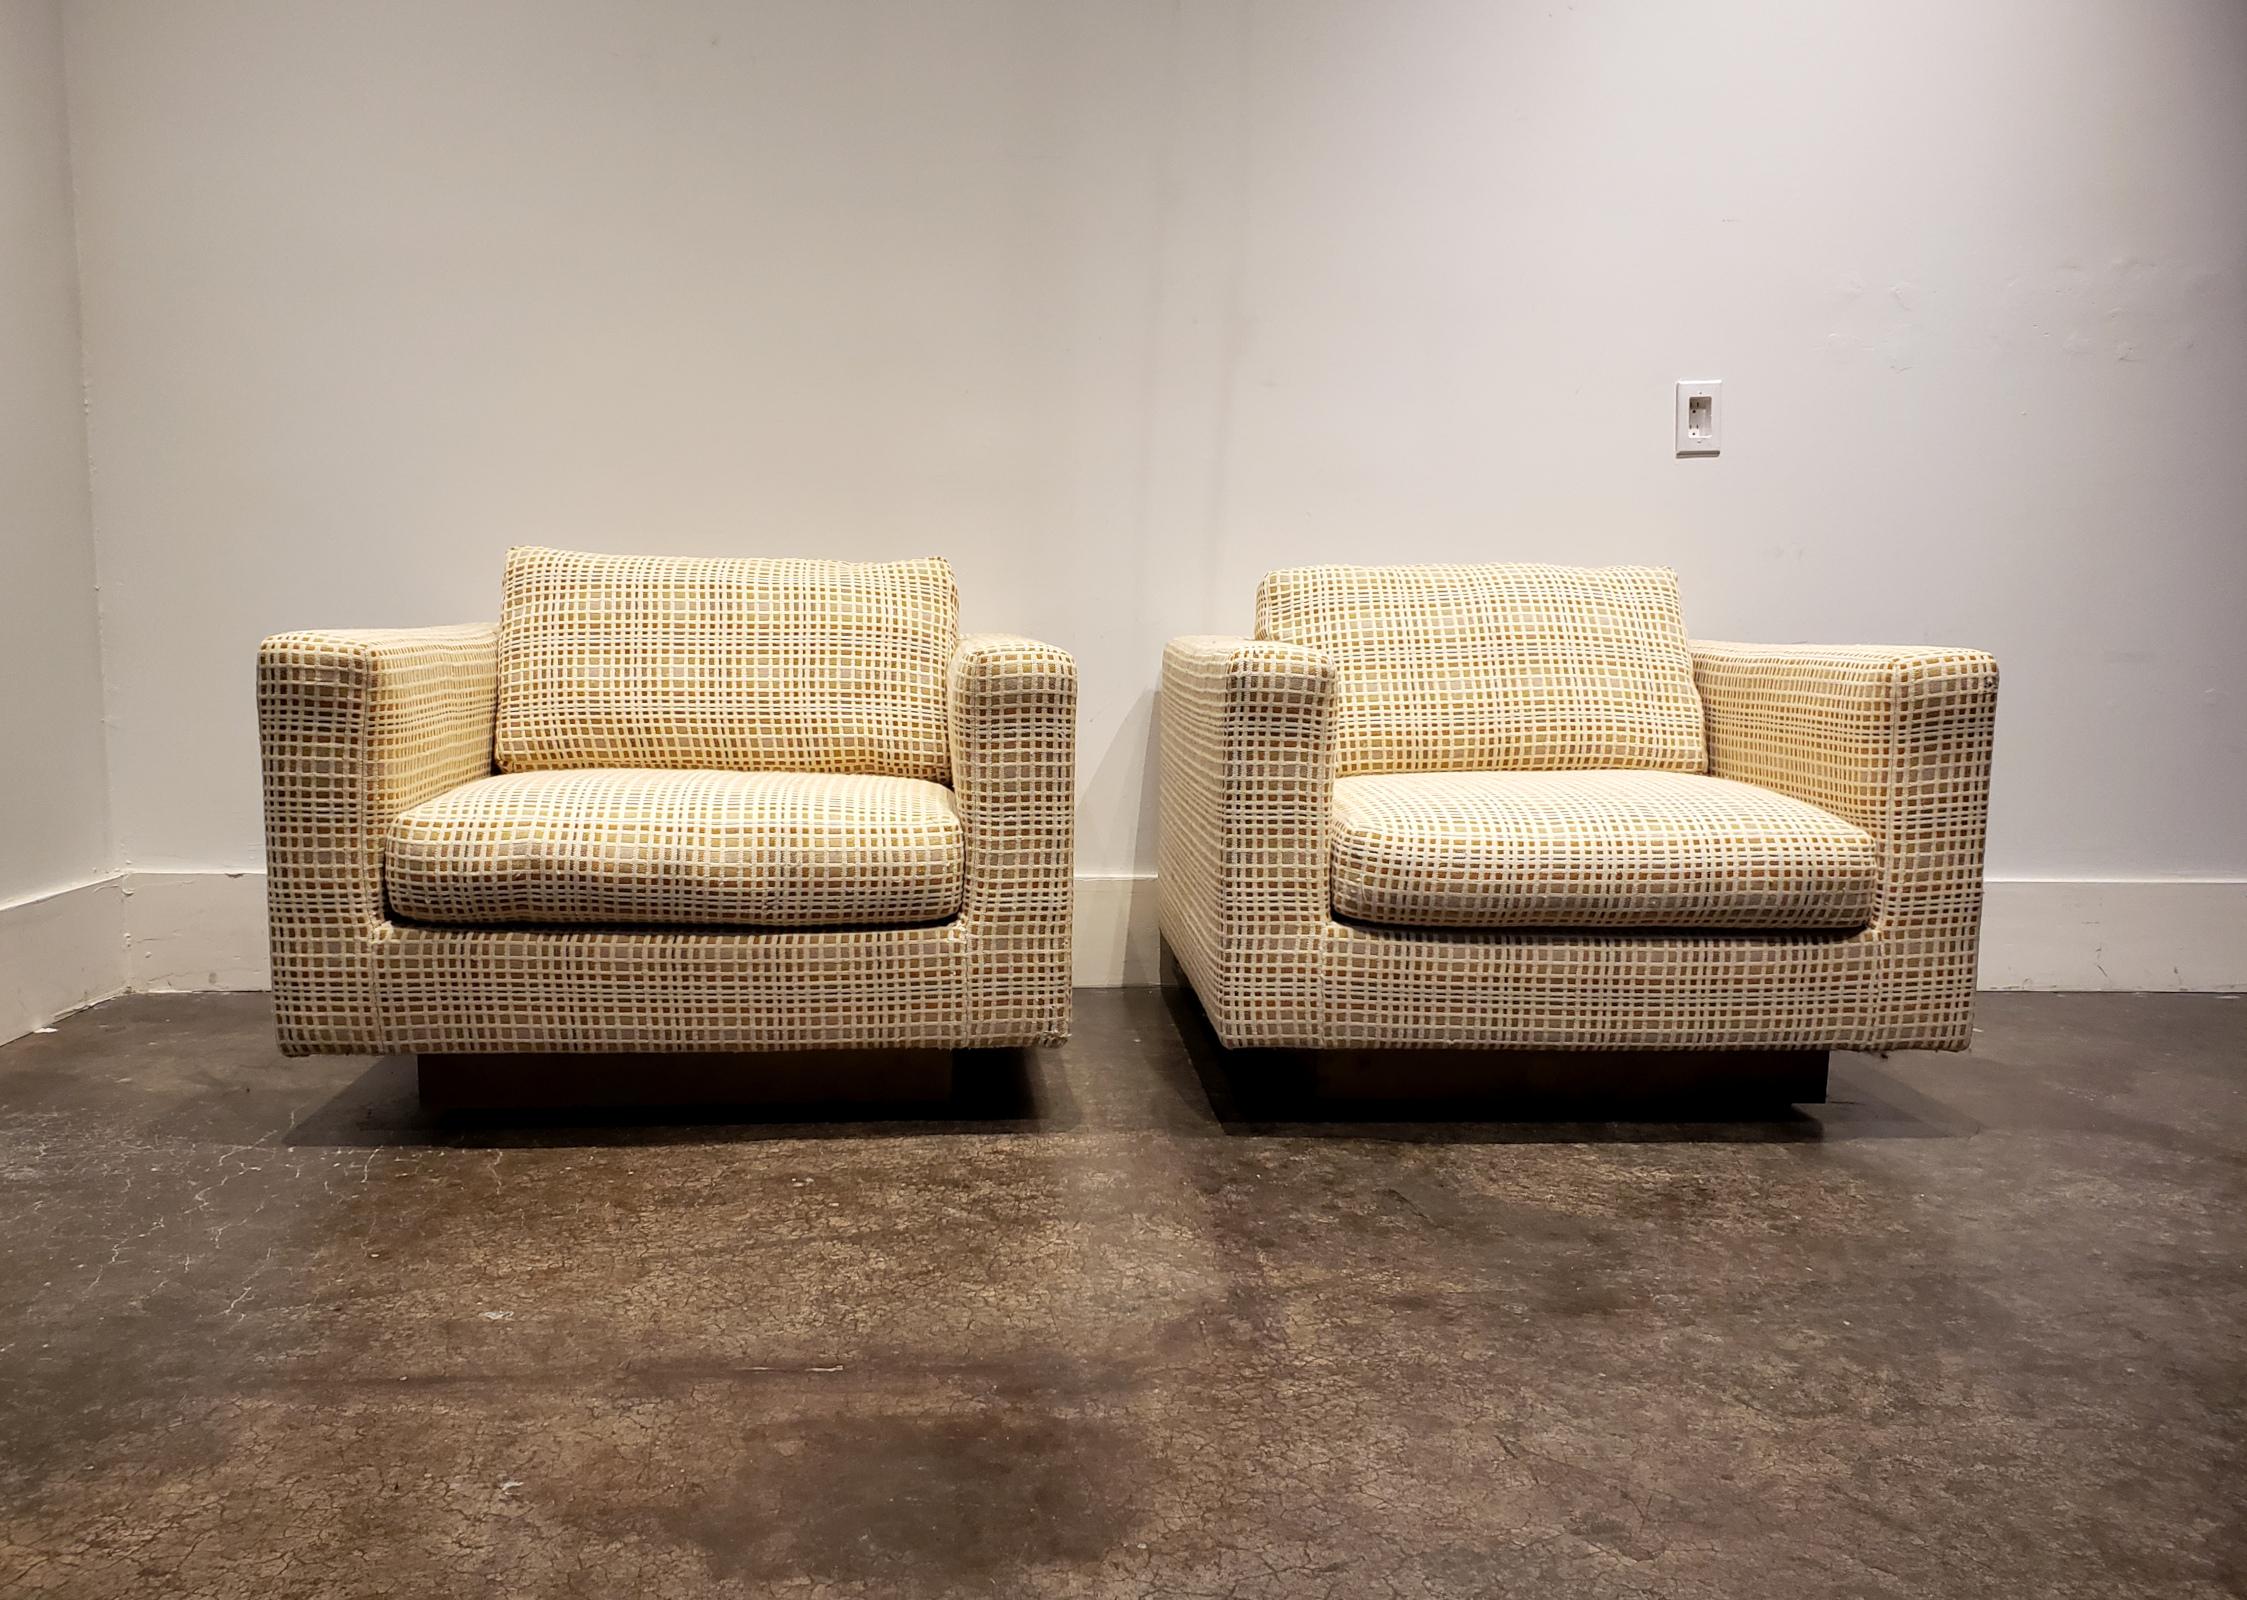 A pair of large and imposing Dunbar club chairs. Original checkered upholstery attributed to Jack Lenor Larsen. Square pedestal base finished in brass veneer. Chairs are sturdy and look great as is or would make a great canvas for an exciting re